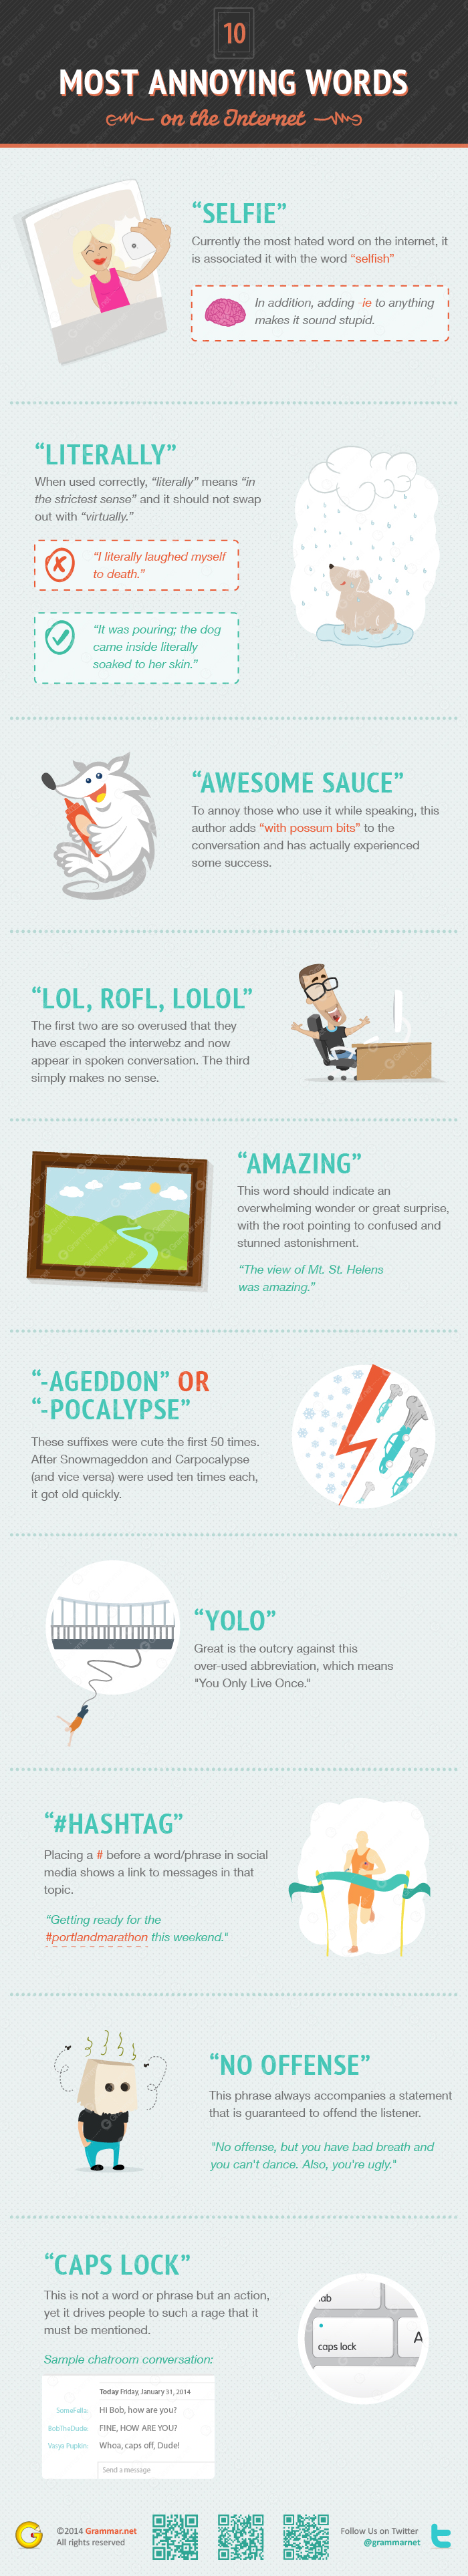 10 irritating words - infographic_small-01-2